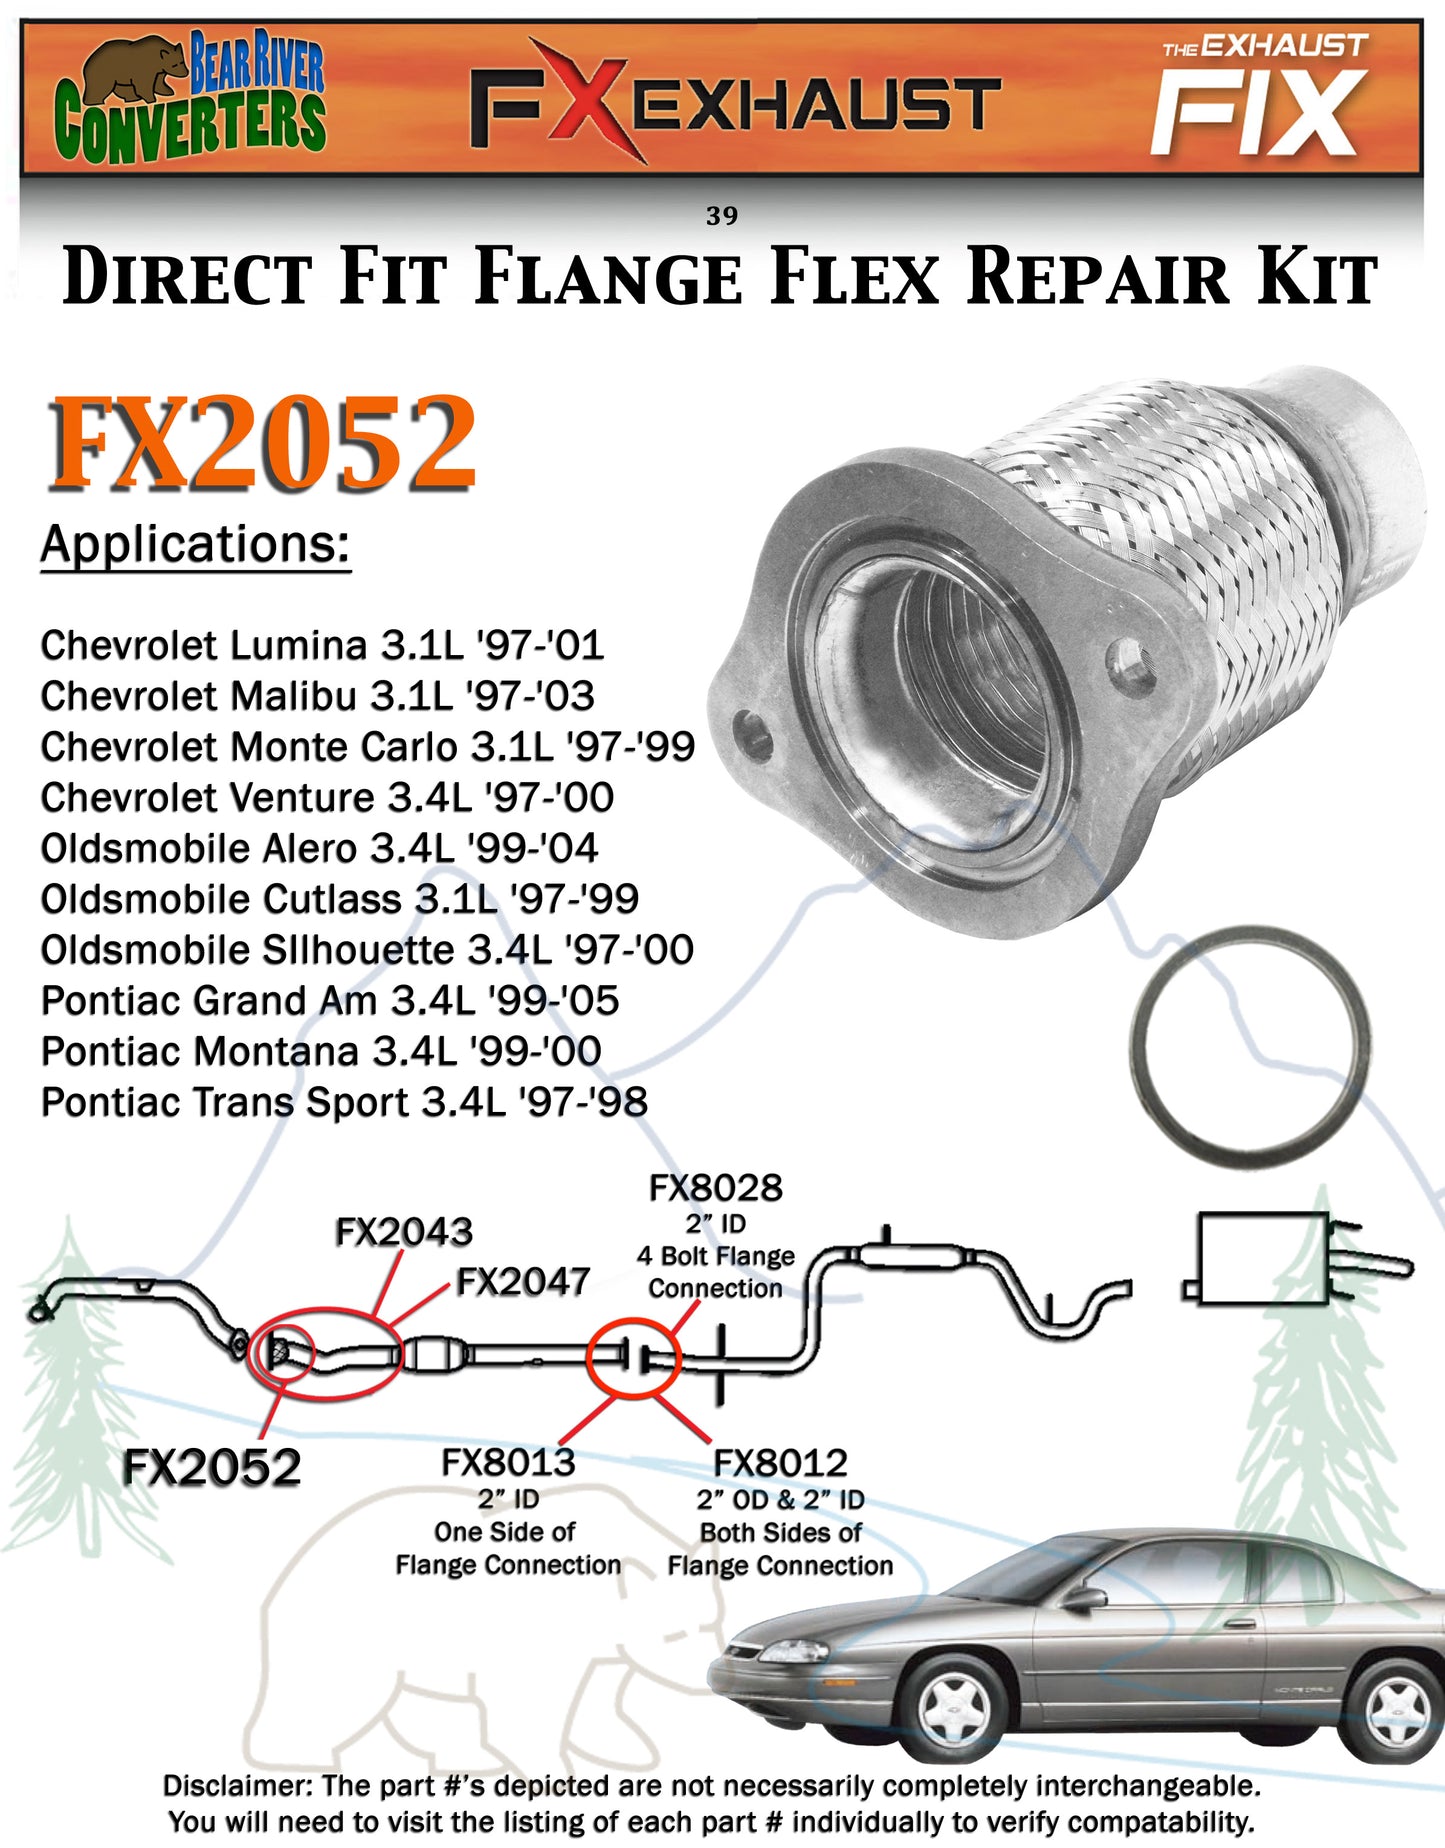 FX2052 Semi Direct Fit Exhaust Flange Repair Flex Pipe Replacement Kit With Gasket